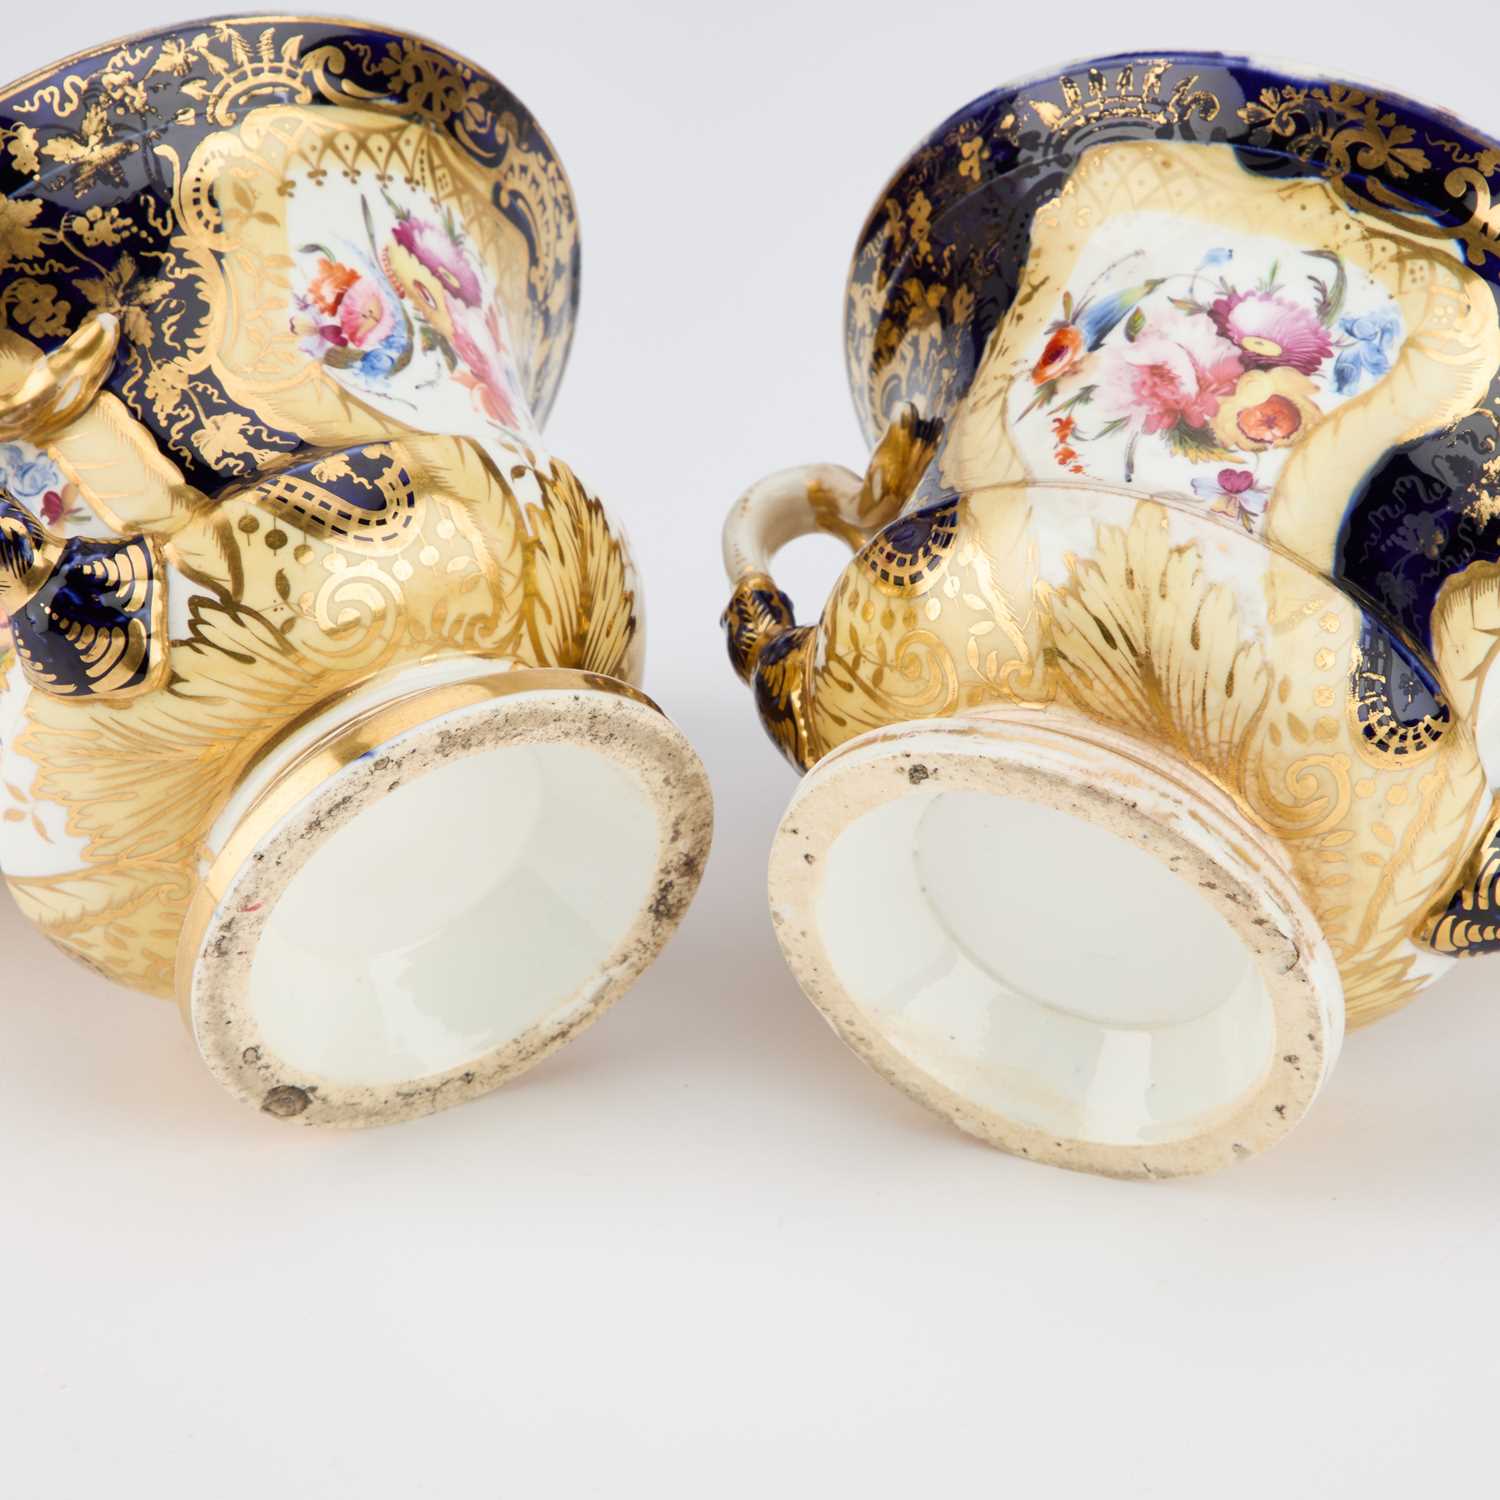 A PAIR OF ENGLISH PORCELAIN WARWICK VASES, 19TH CENTURY - Image 2 of 2